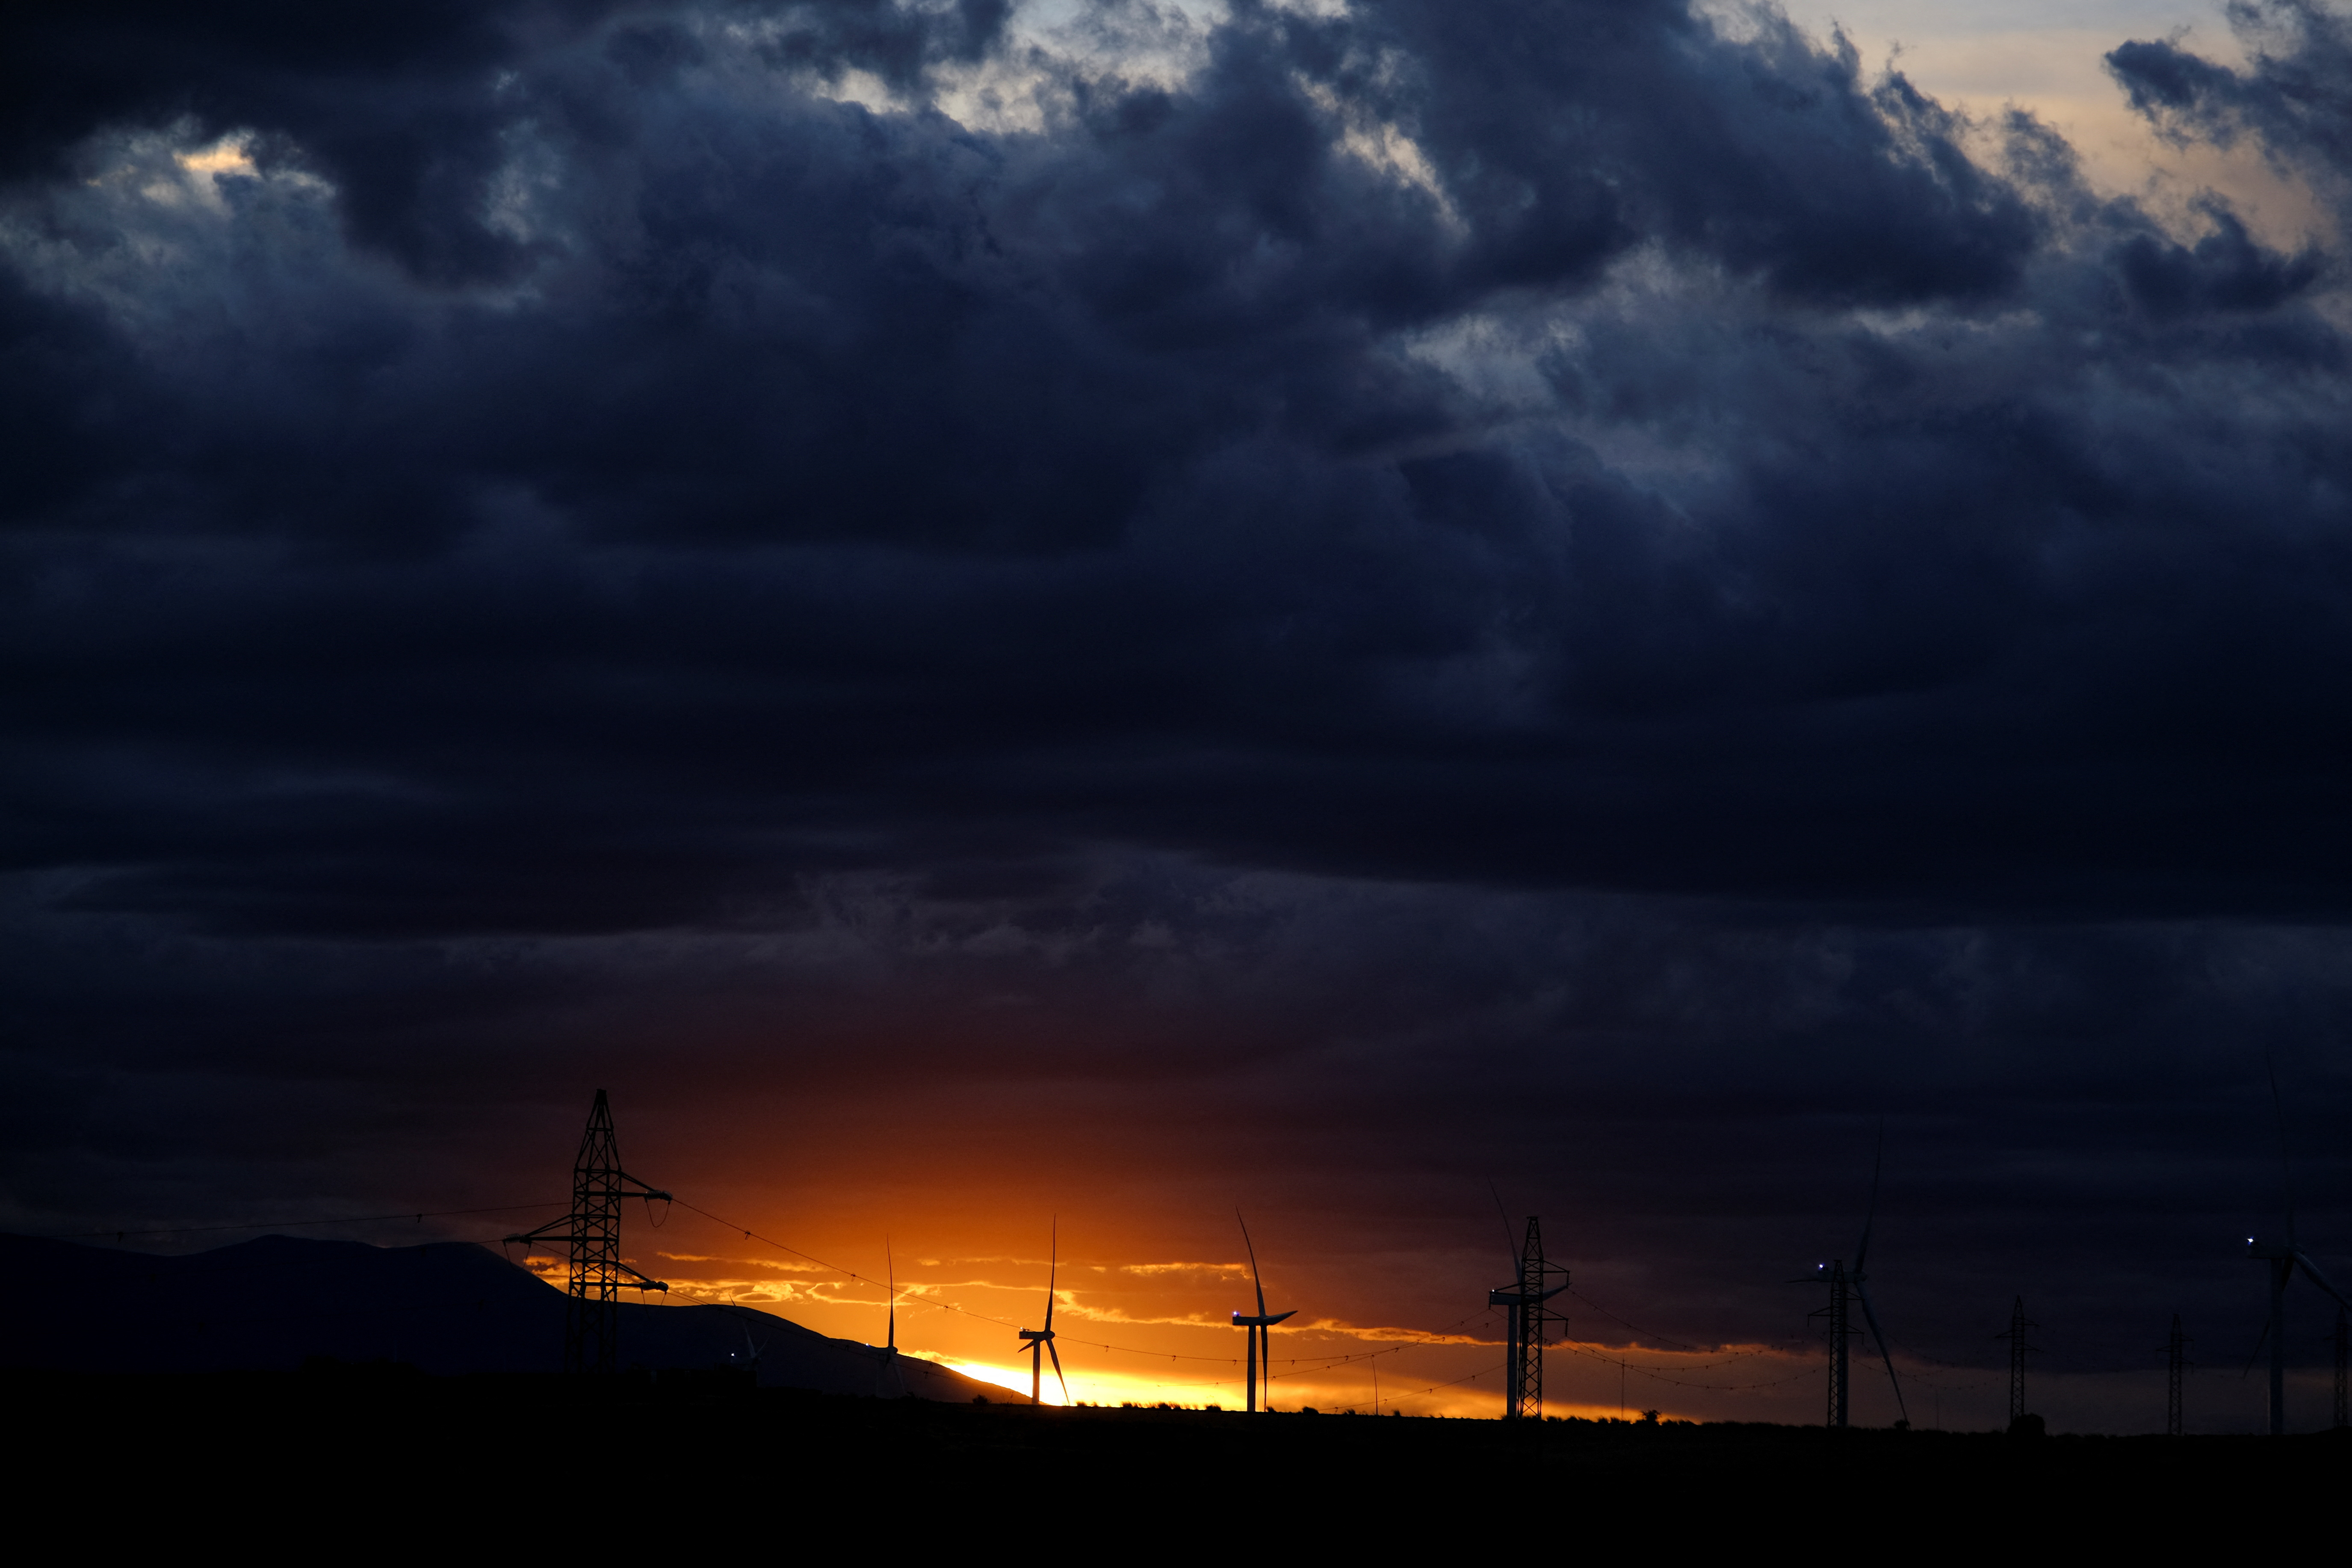 A view shows wind turbines during sunset in Alagon